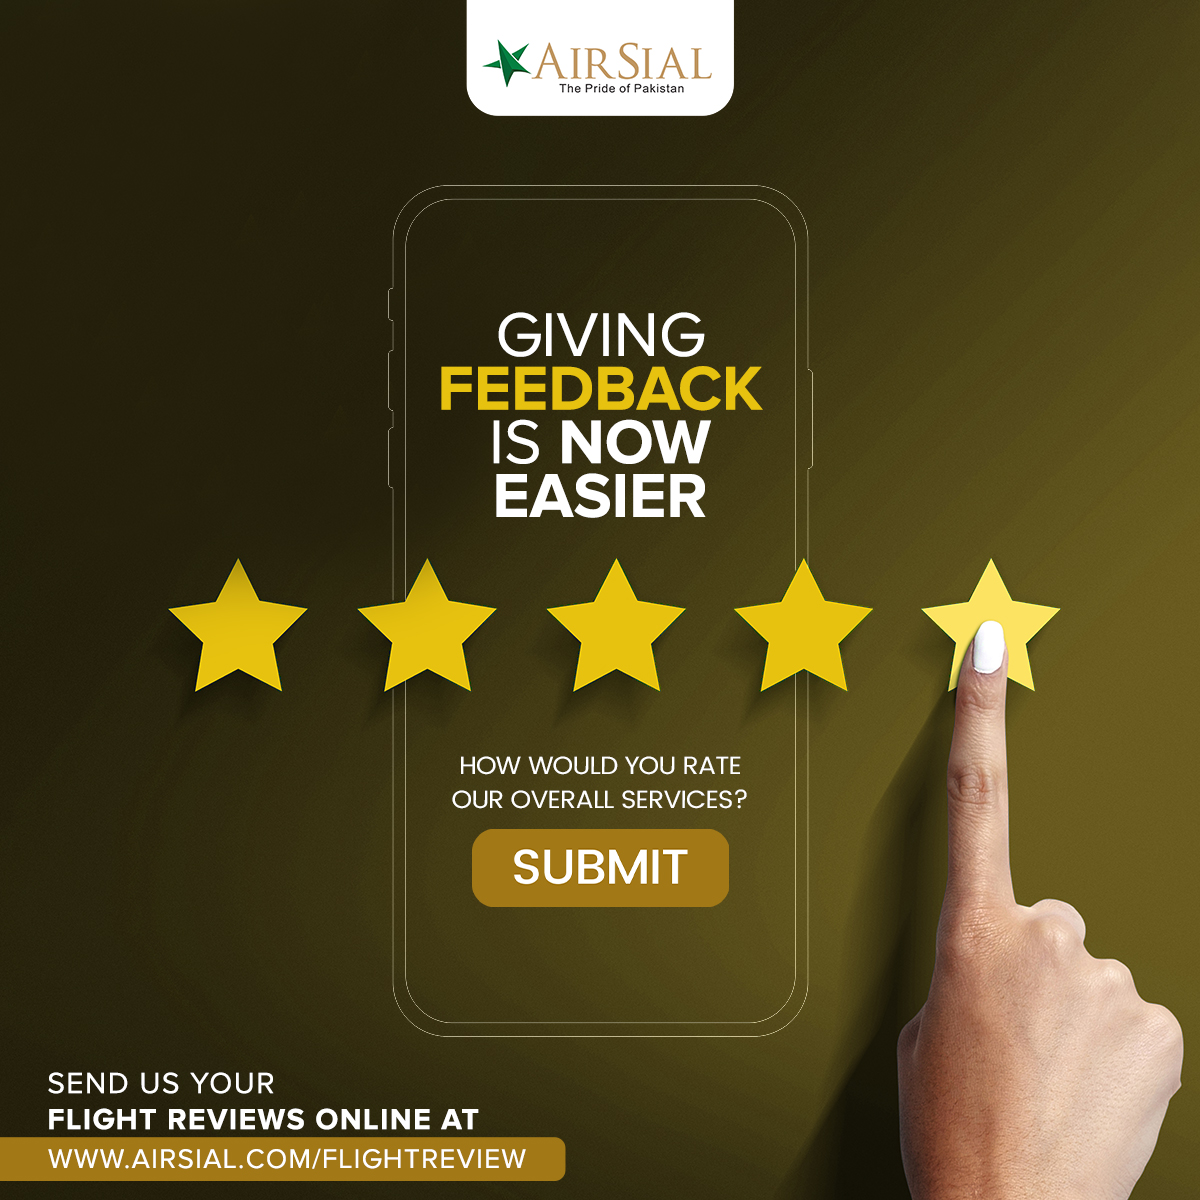 Giving feedback is now easier!
Now you can simply share your Flight Reviews online at airsial.com/flightreview
#AirSial - The Pride of #Pakistan